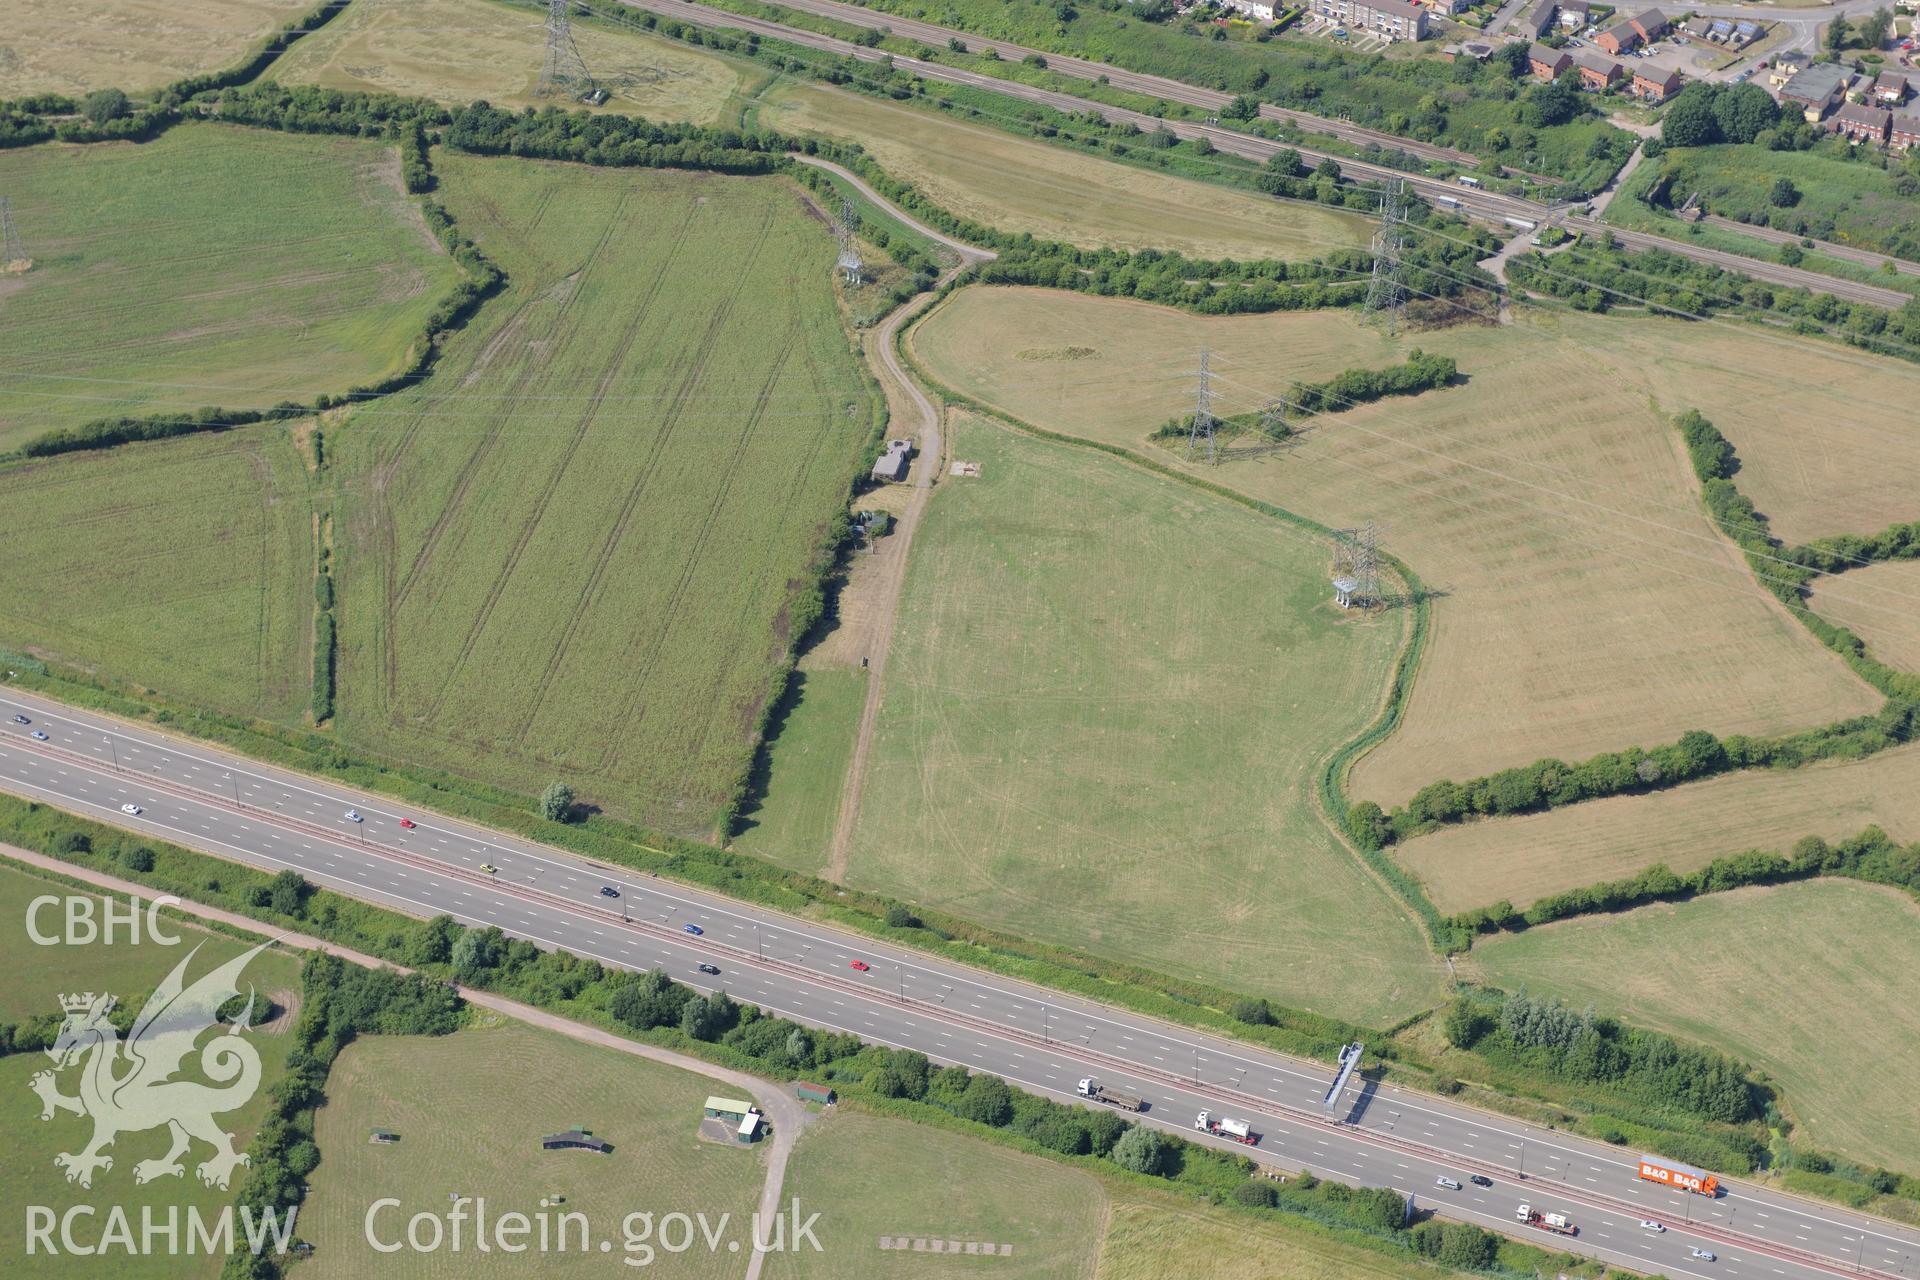 Caldicot & Rogiet rifle ranges, & section of M4 motorway running past southern edge of Caldicot on its way to 2nd Severn Crossing. Oblique aerial photograph taken during RCAHMW?s programme of archaeological aerial reconnaissance by Toby Driver, 01/08/2013.